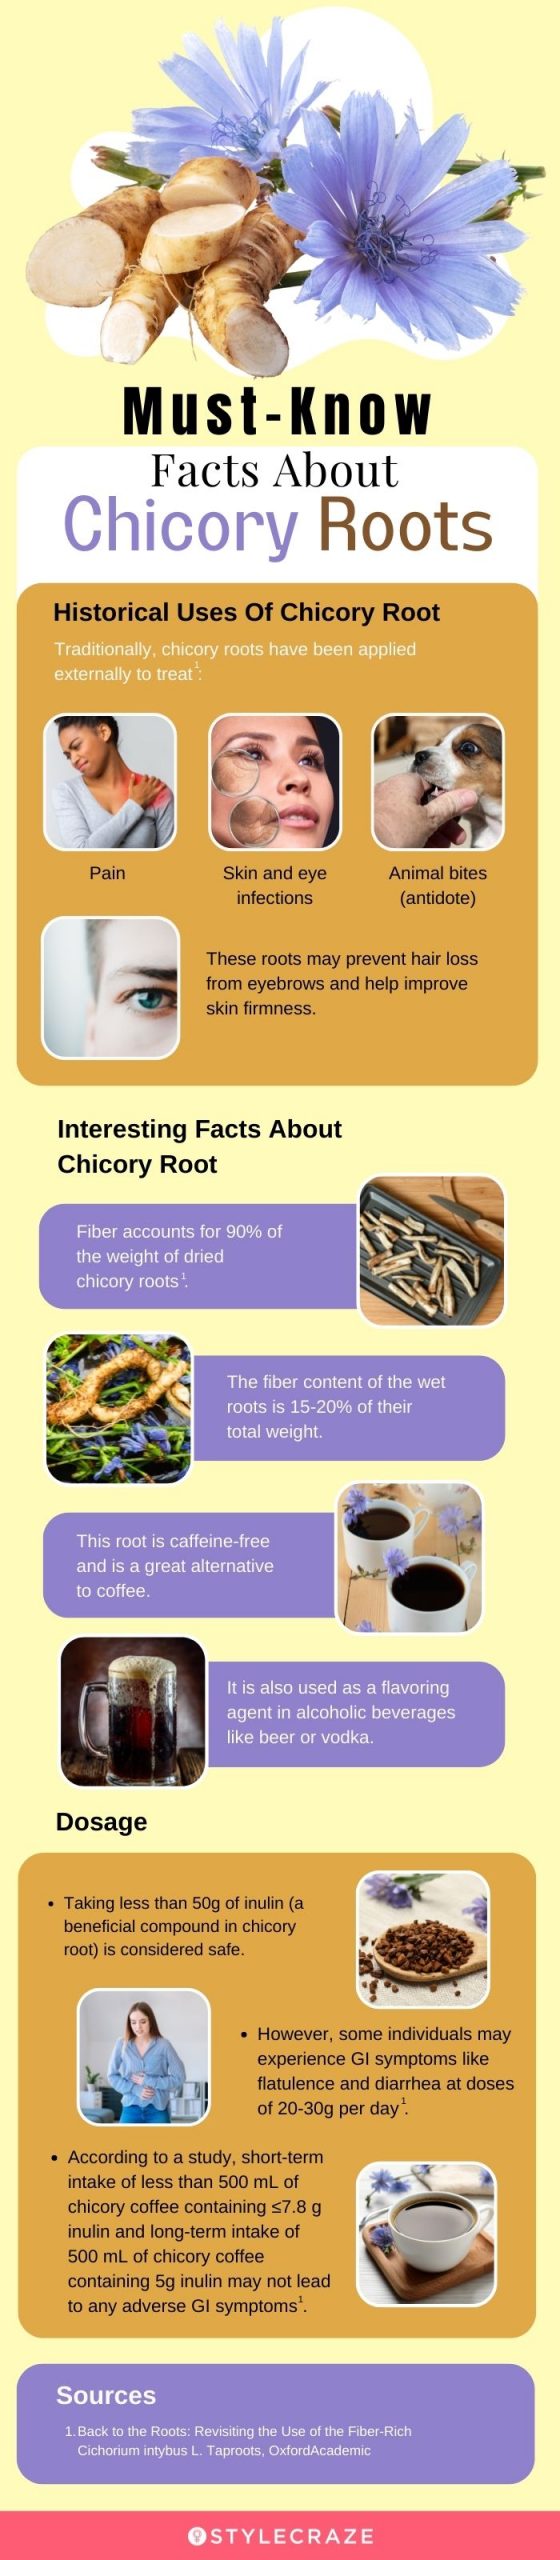 must know facts about chicory roots [infographic]